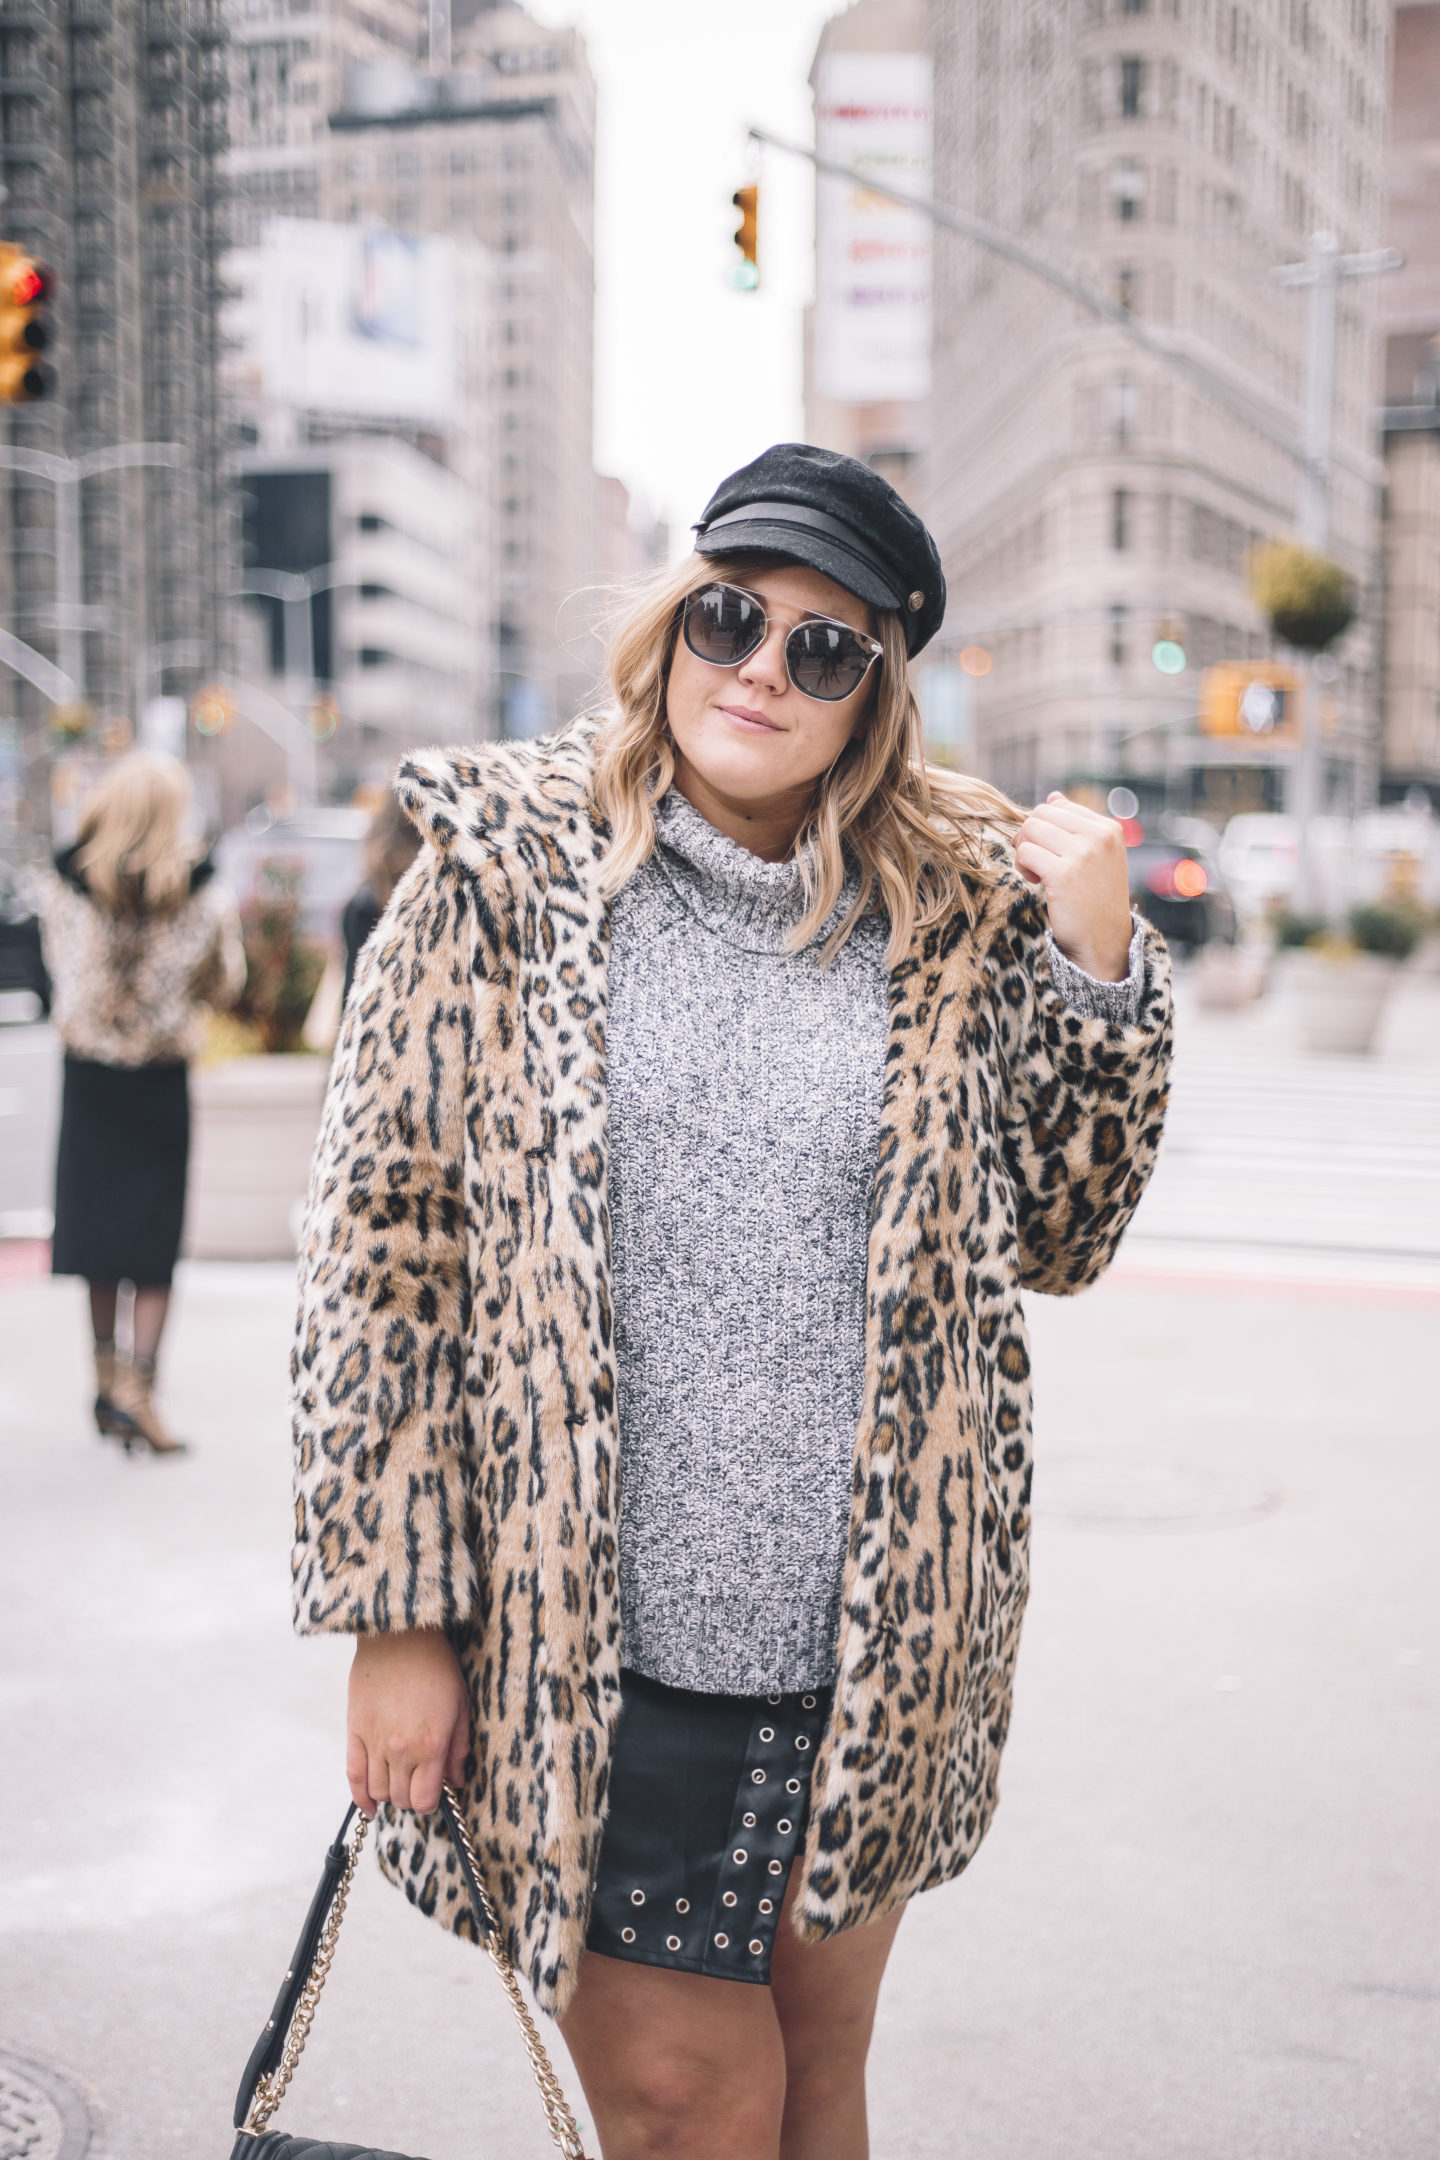 Monochrome Outfit + A Pop Of Leopard at NYFW